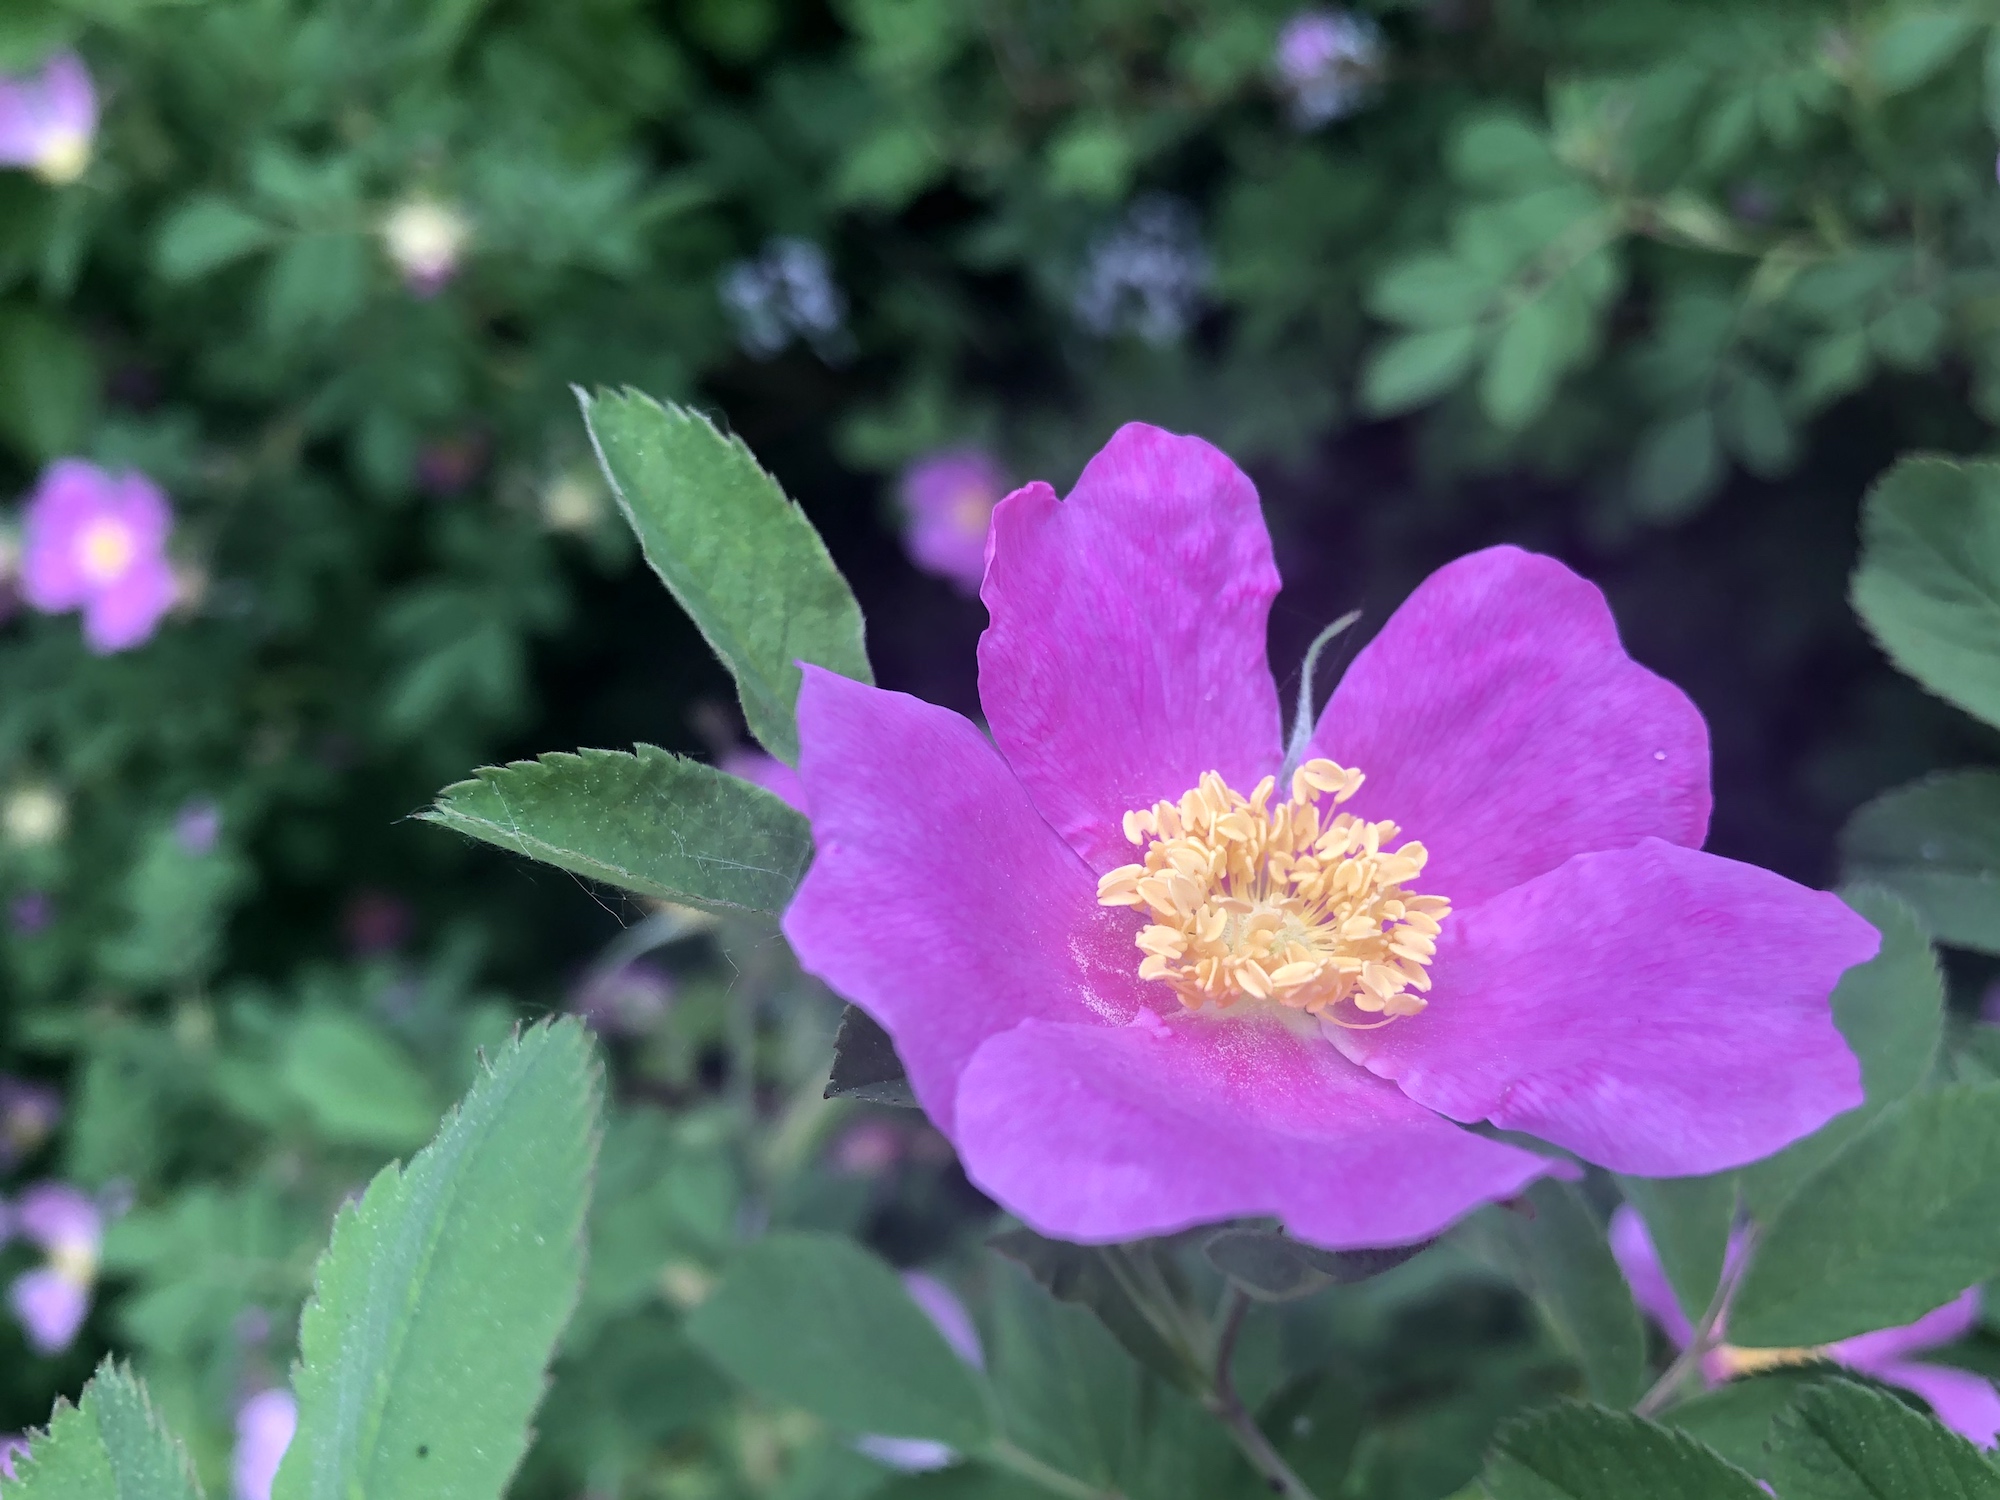 Prarie Rose by Duck Pond (Rosa arkansana) stone wall in Madison, Wisconsin on June 5, 2020.